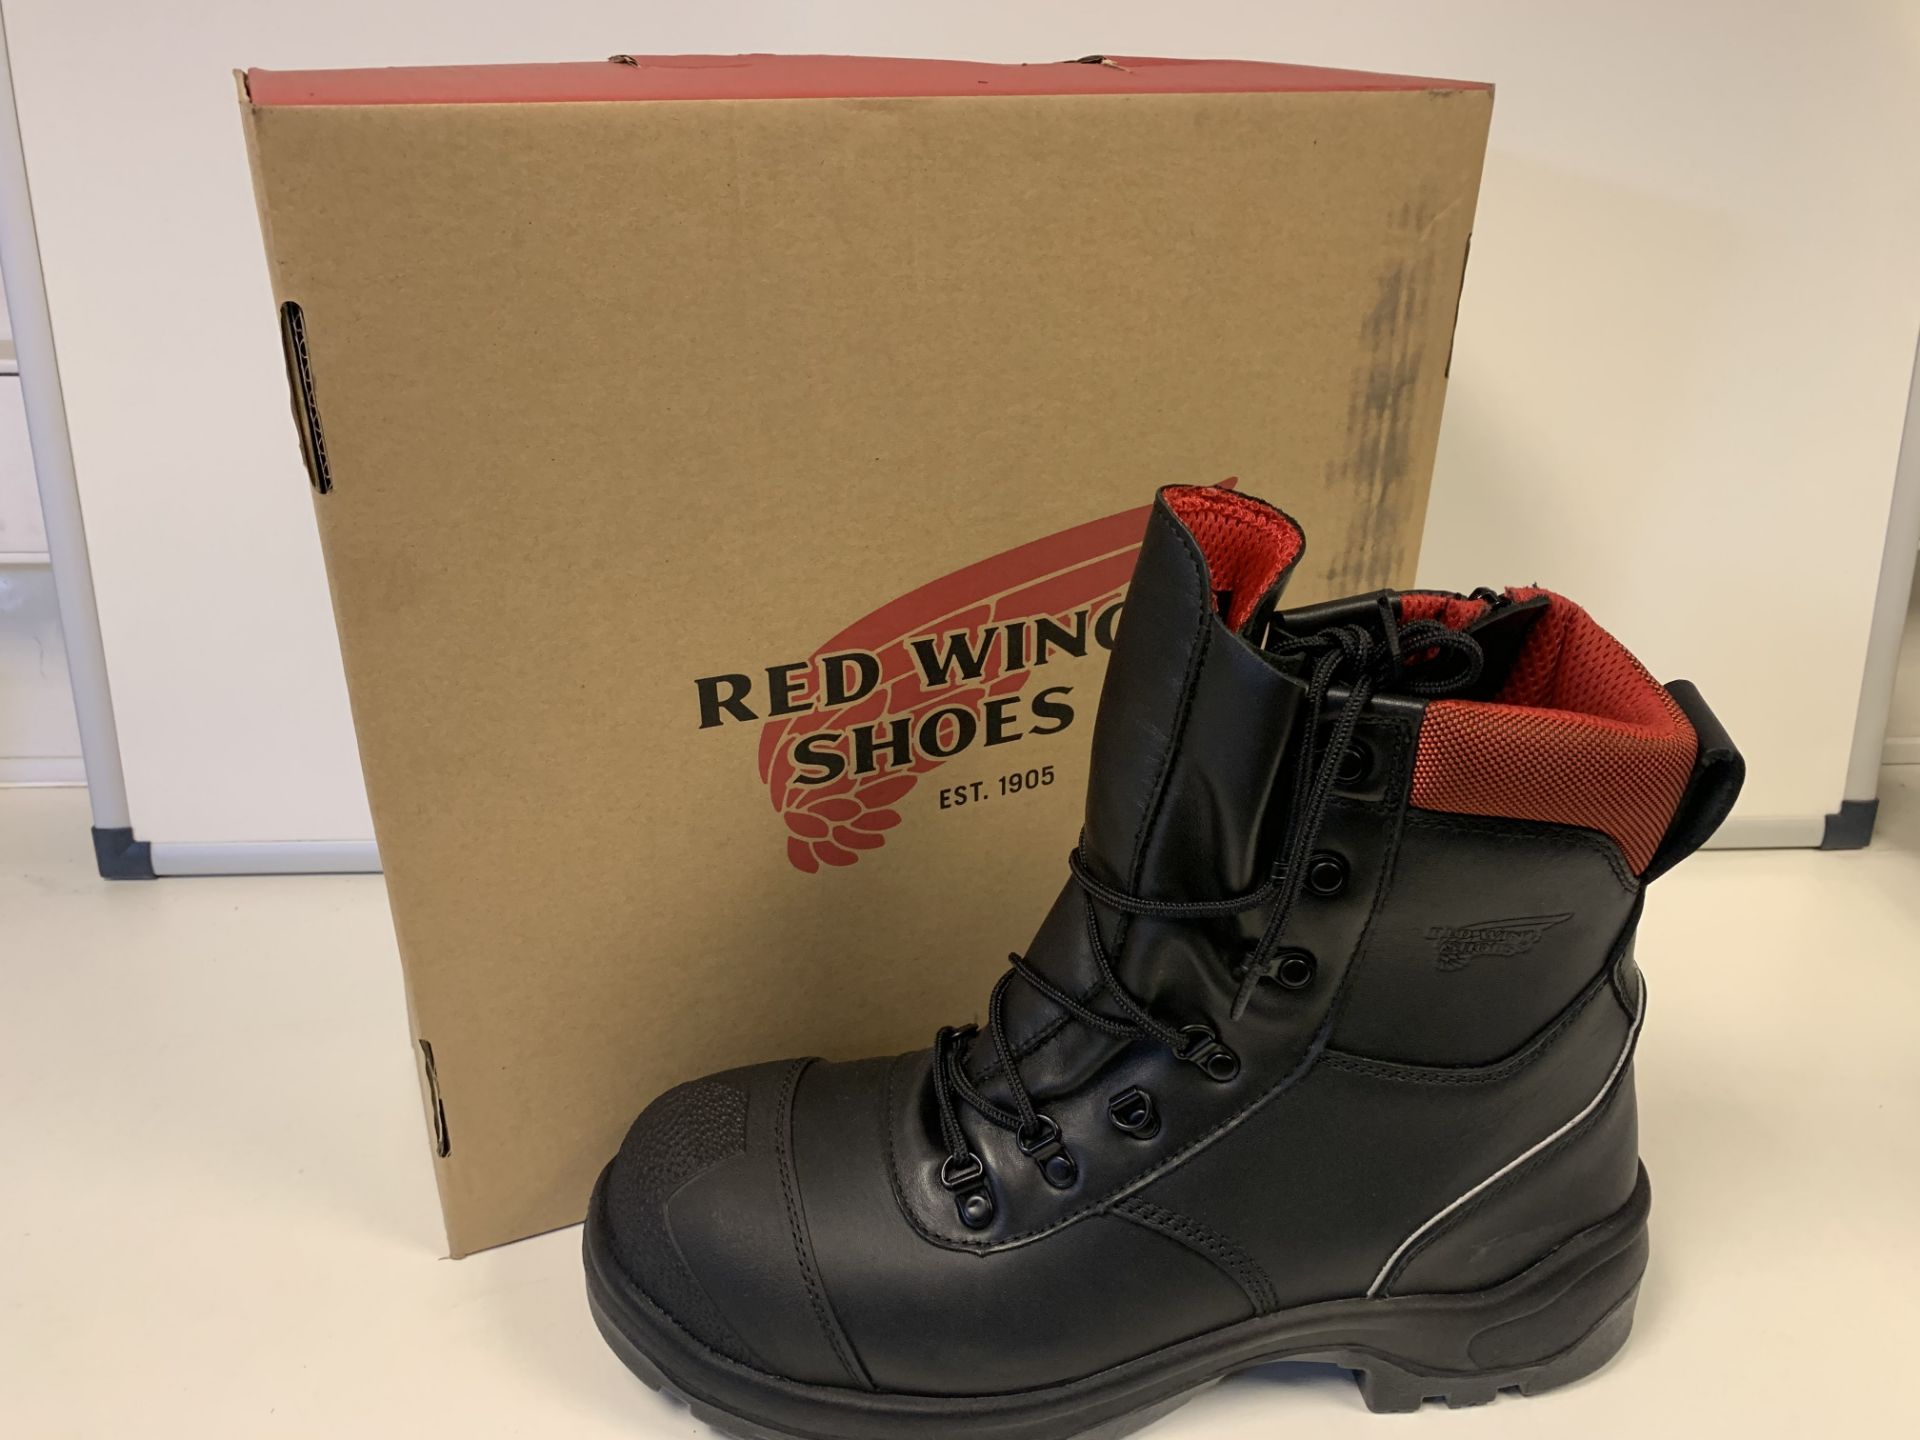 6 X BRAND NEW BOXED RED WING NON METALLIC TOE PUNCTURE RESISTANT SIZE 3.5 WORK BOOTS (667/02)